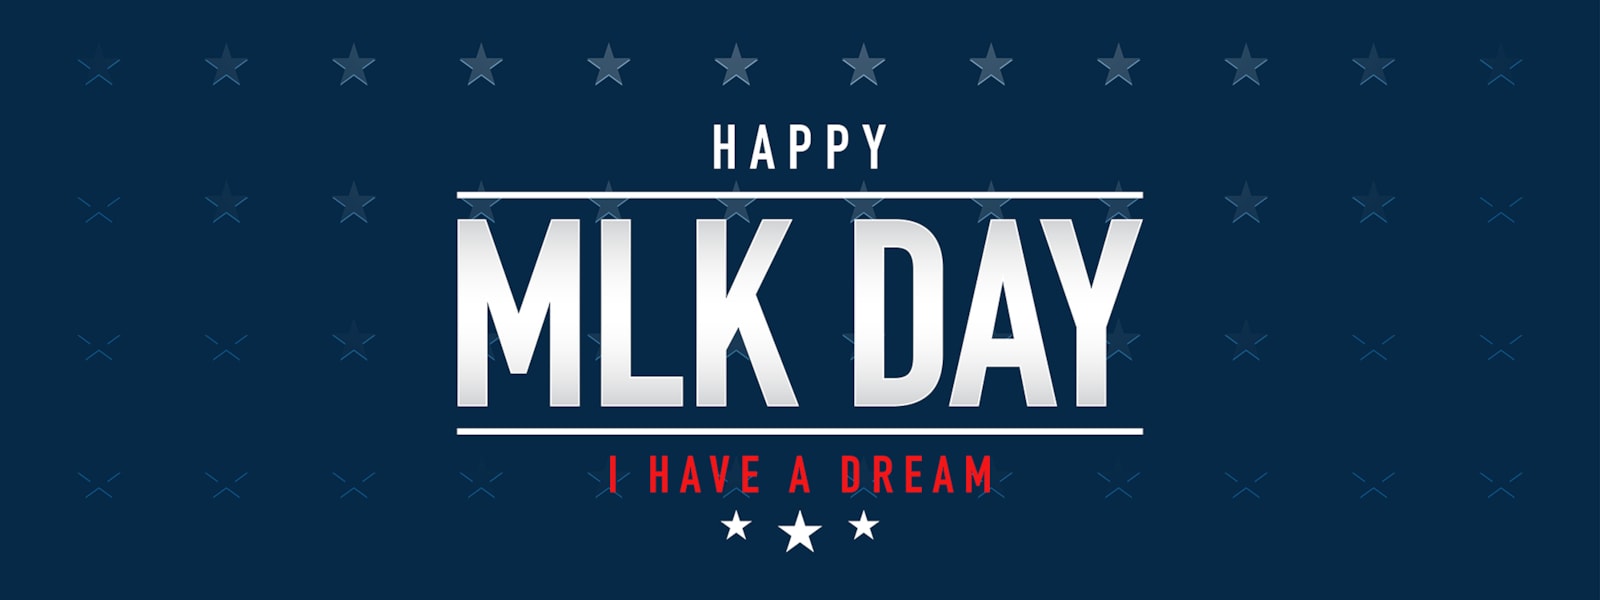 Happy MLK Day, I have a dream on a stars background